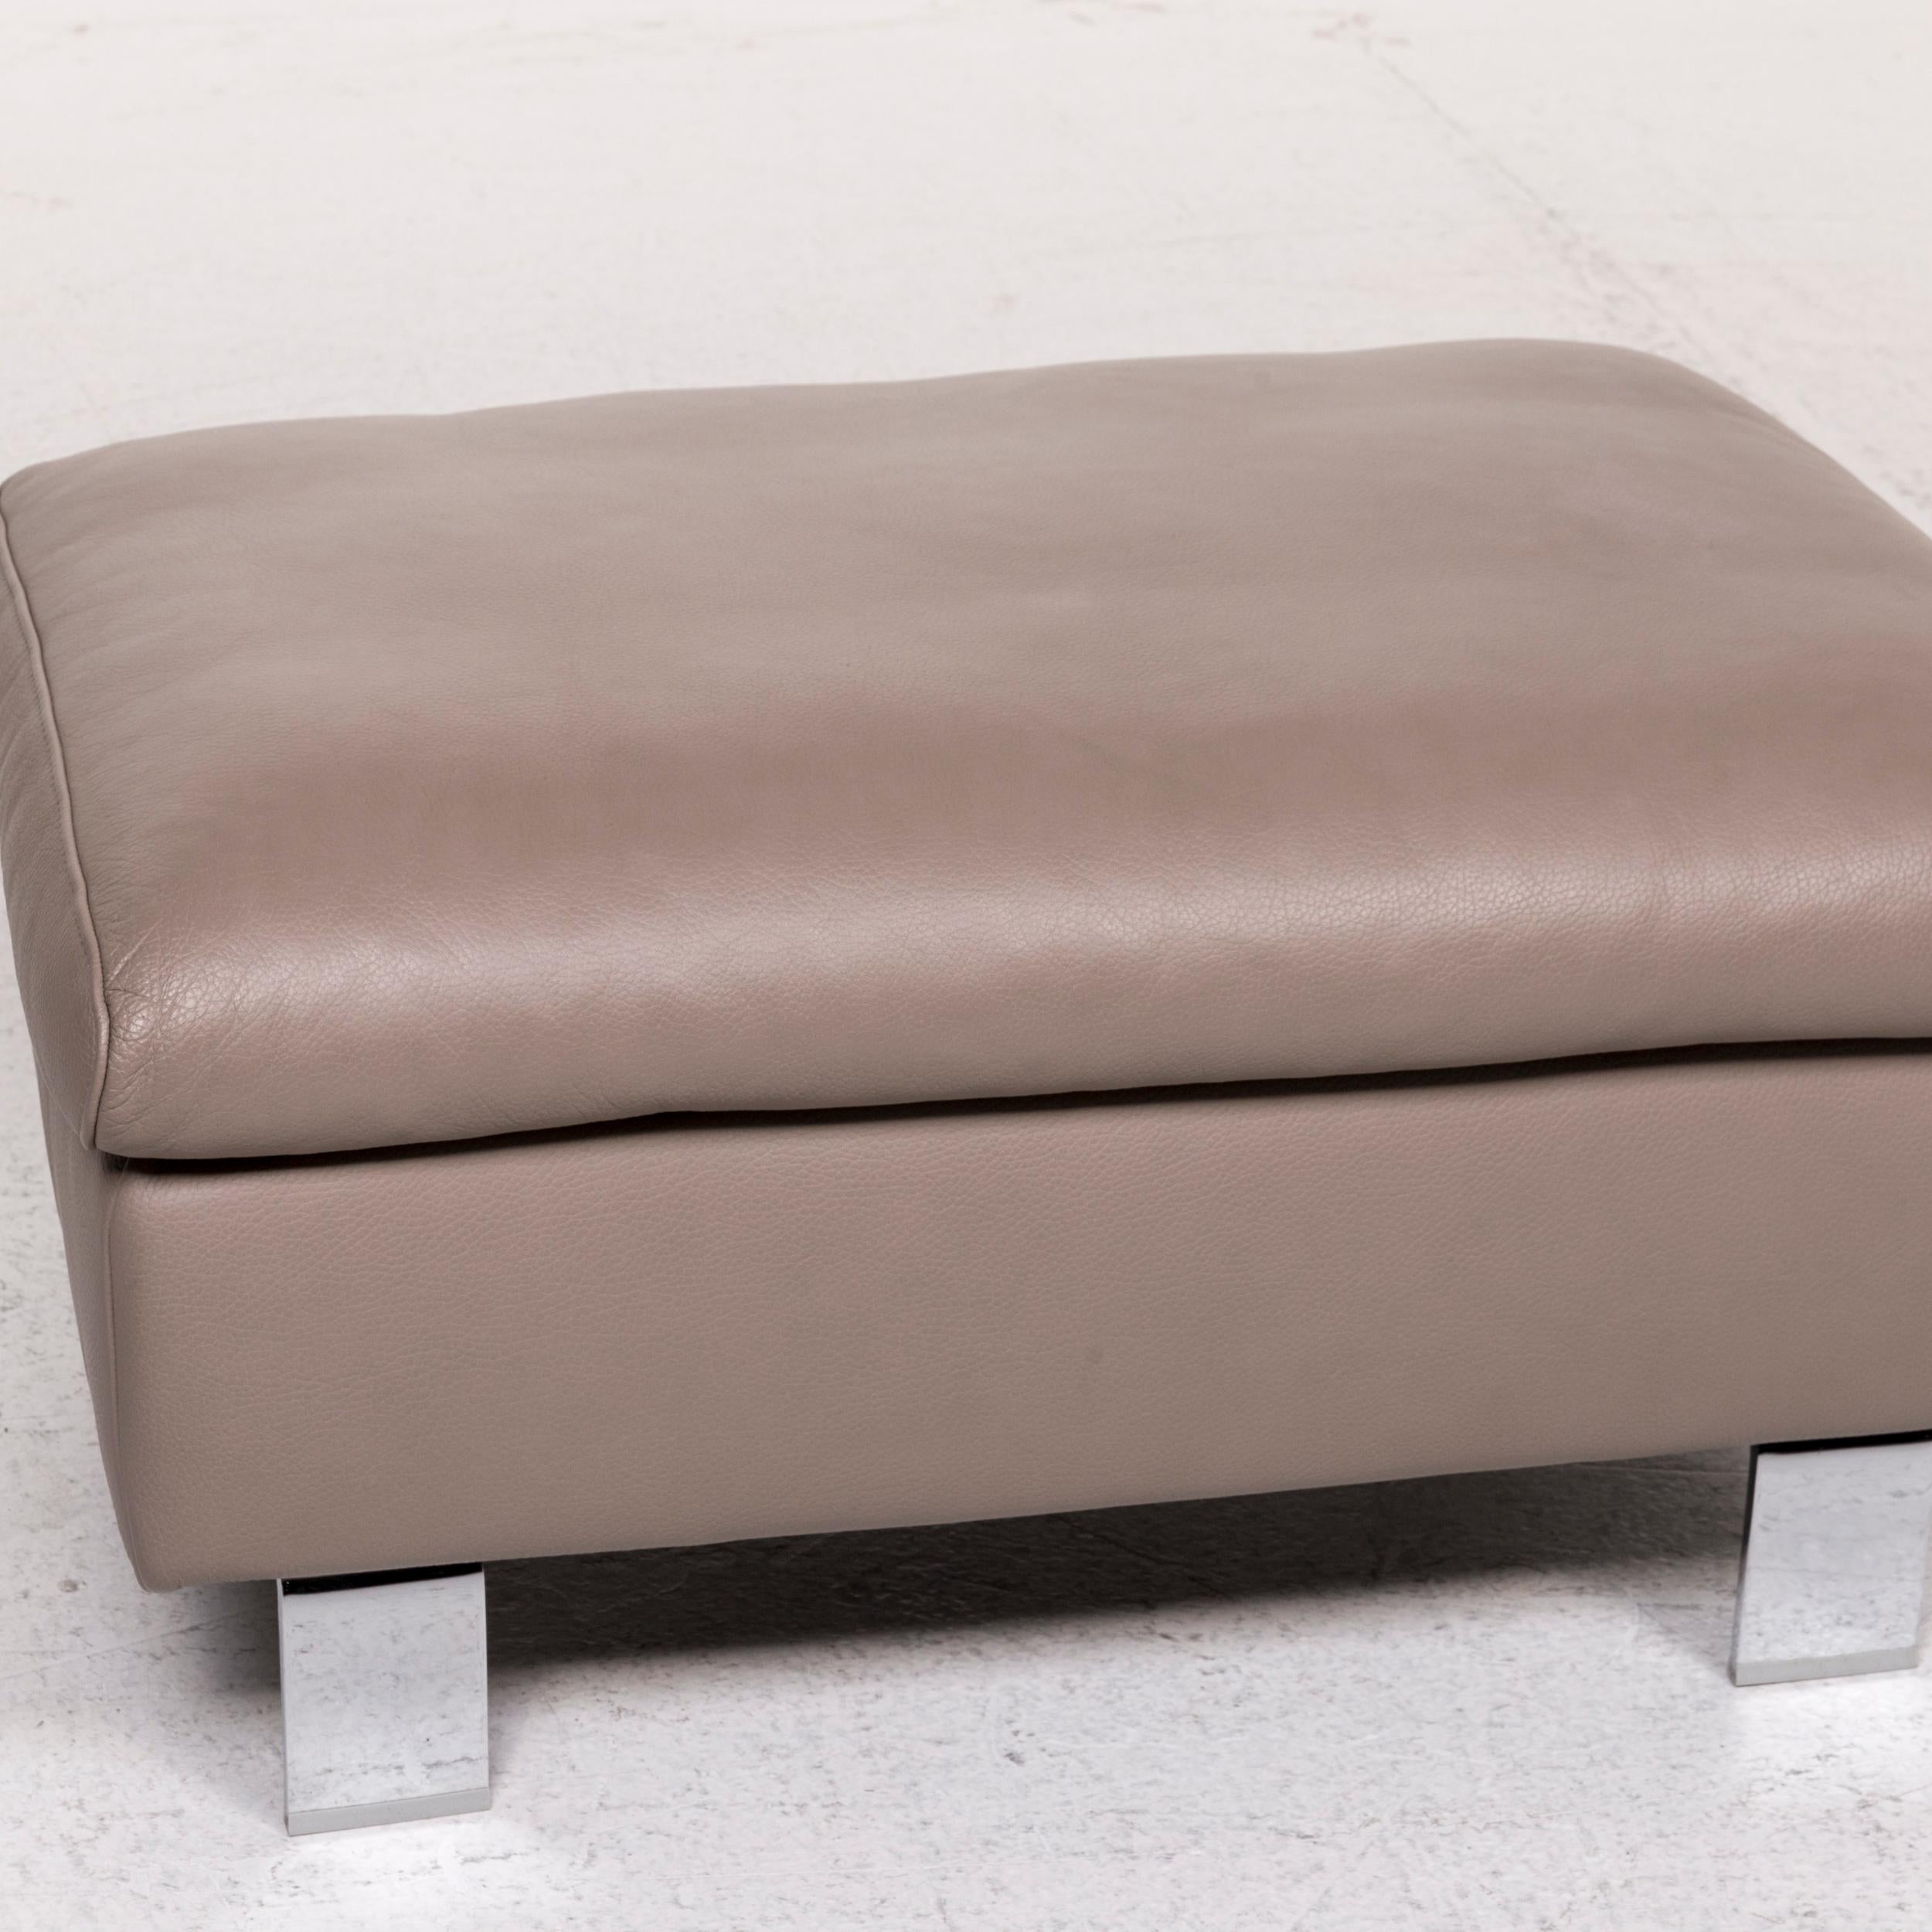 We bring to you an Ewald Schillig leather stool brown gray beige cappucino ottoman.

 

 Product measurements in centimeters:
 

 Depth 61
 Width 85
 Height 43.





  